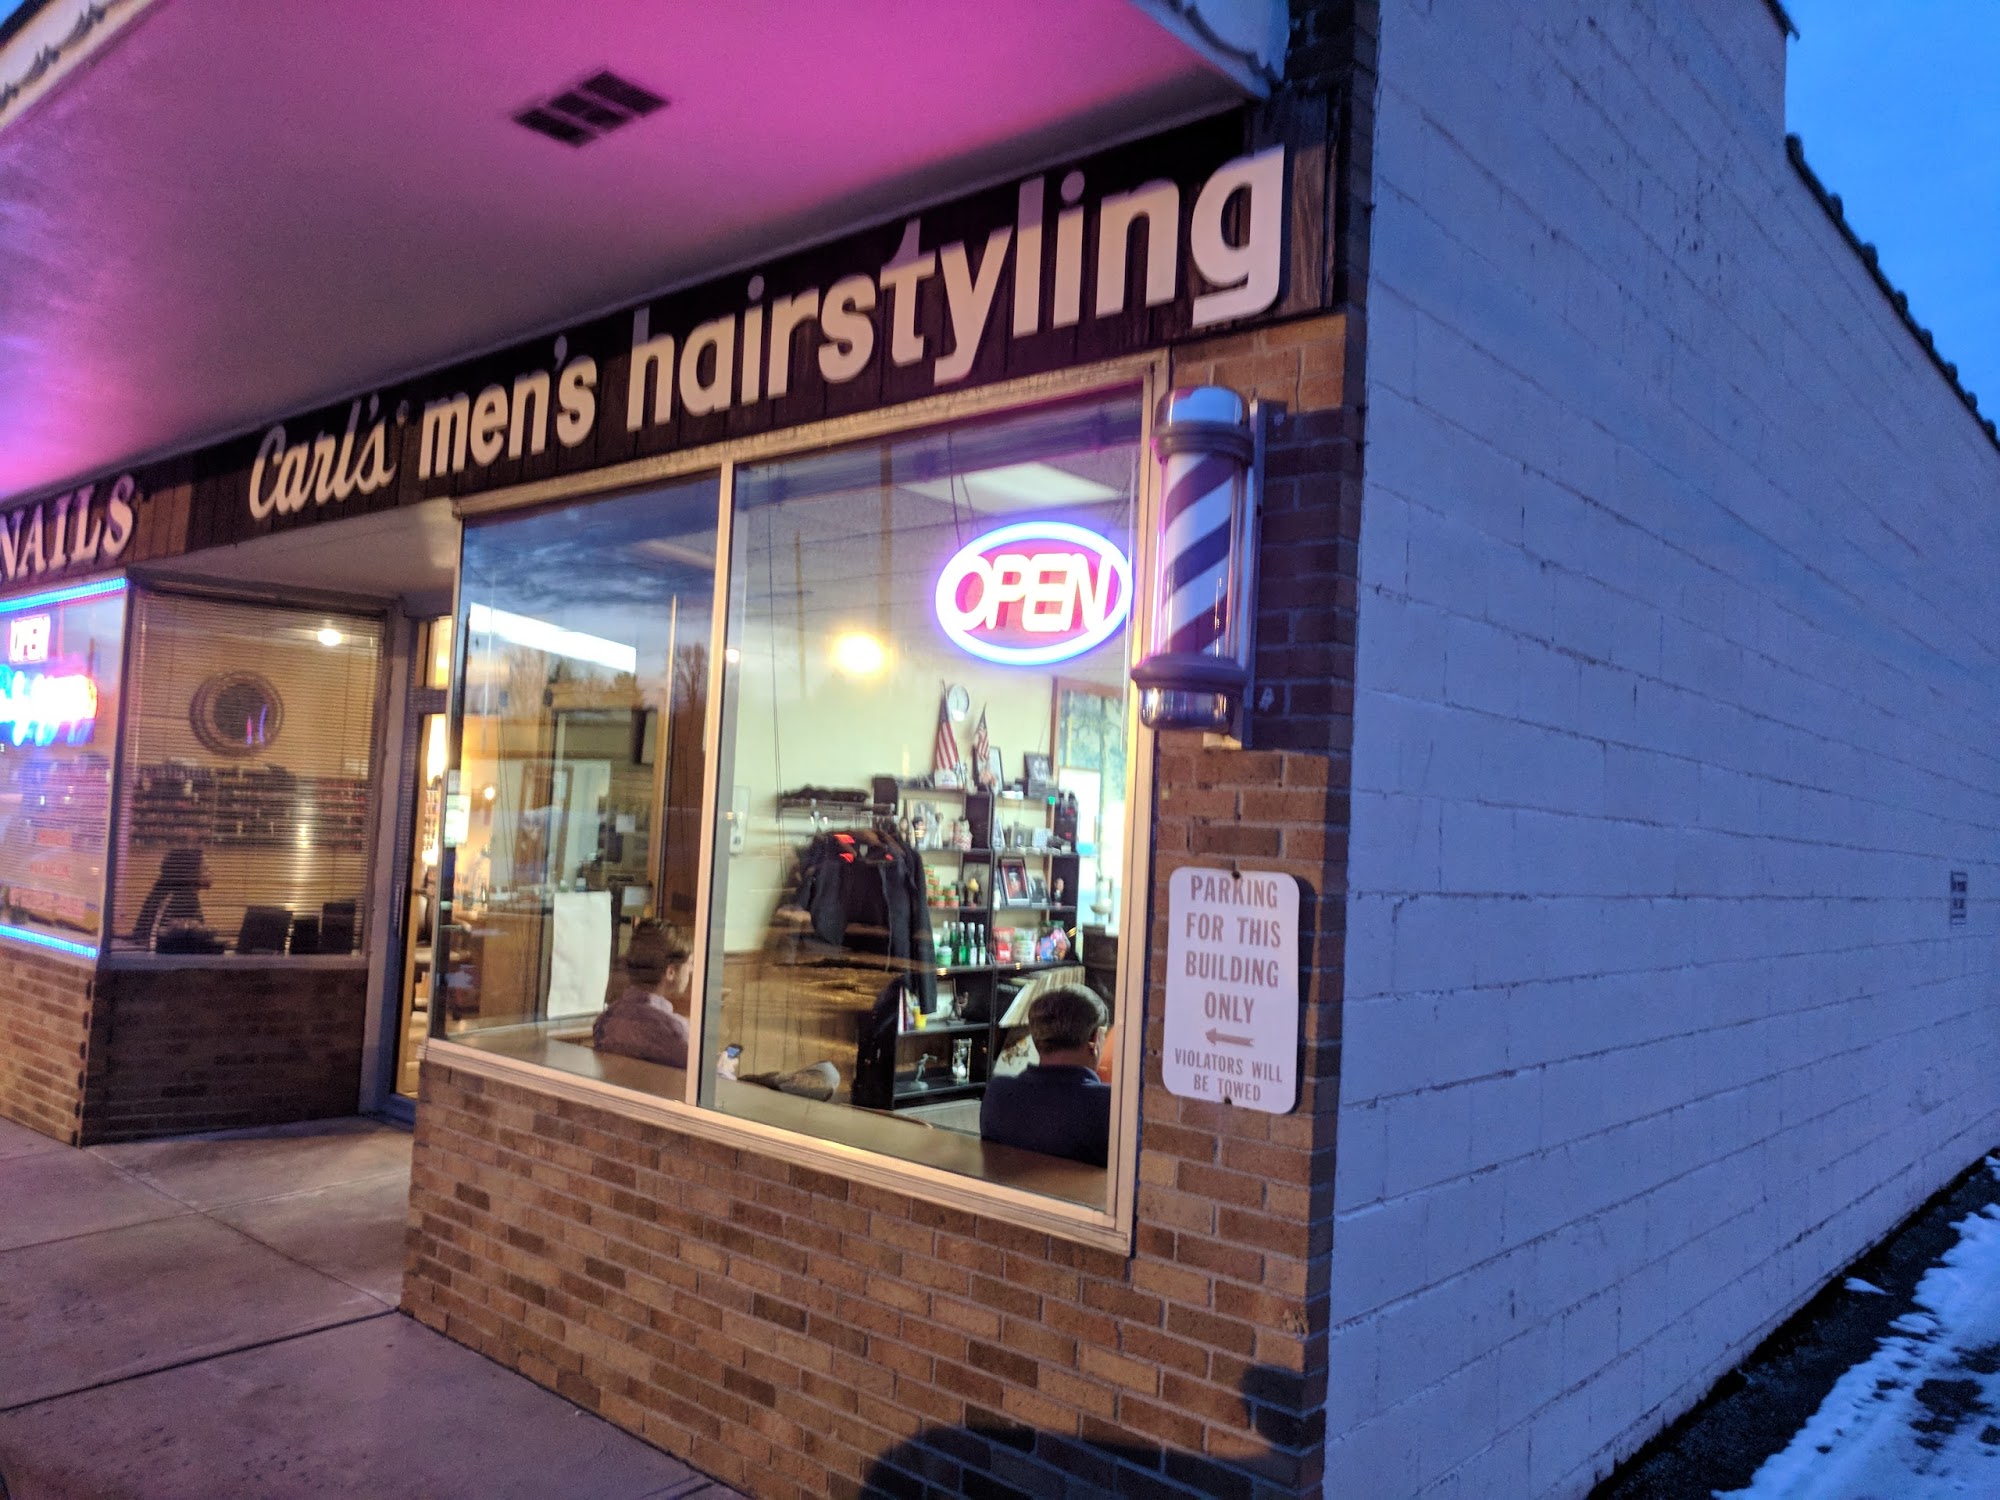 Carl's Men's Hairstyling